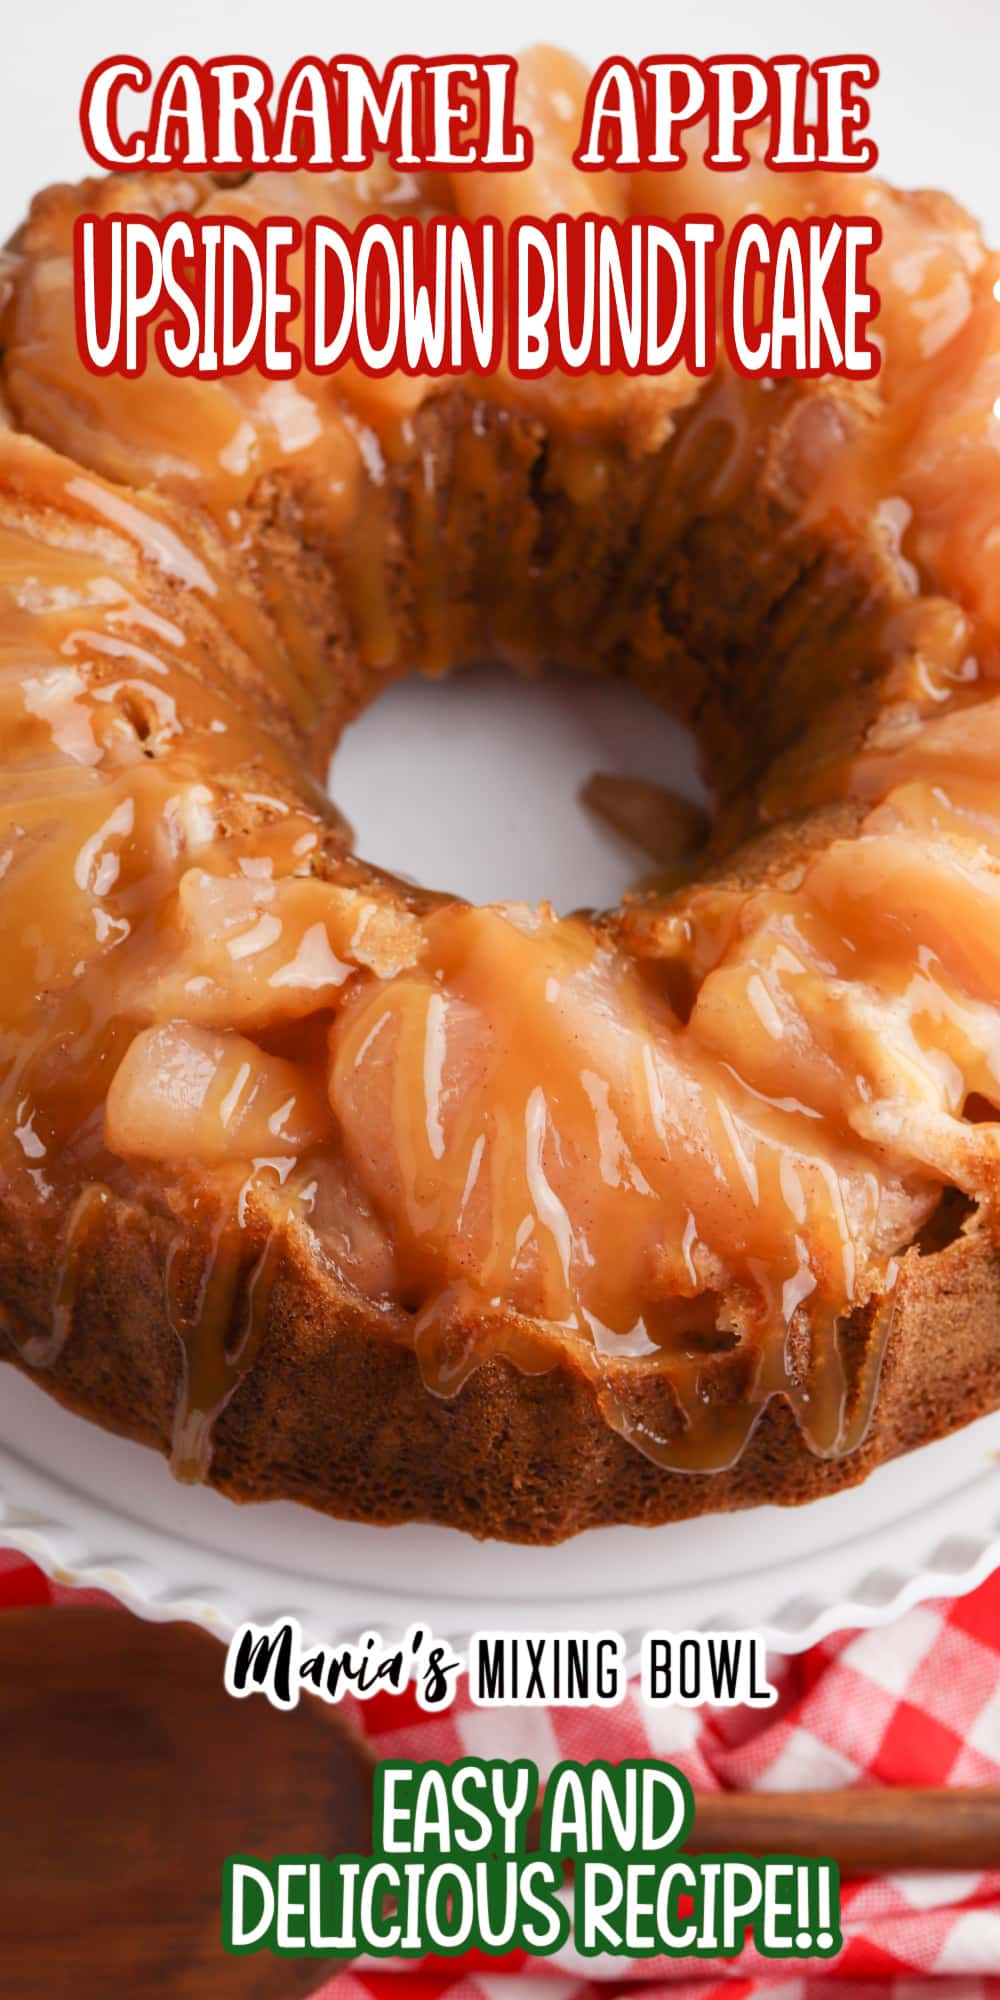 birds eye image of the caramel apple upside down bundt cake on a white cake plate with the name in text